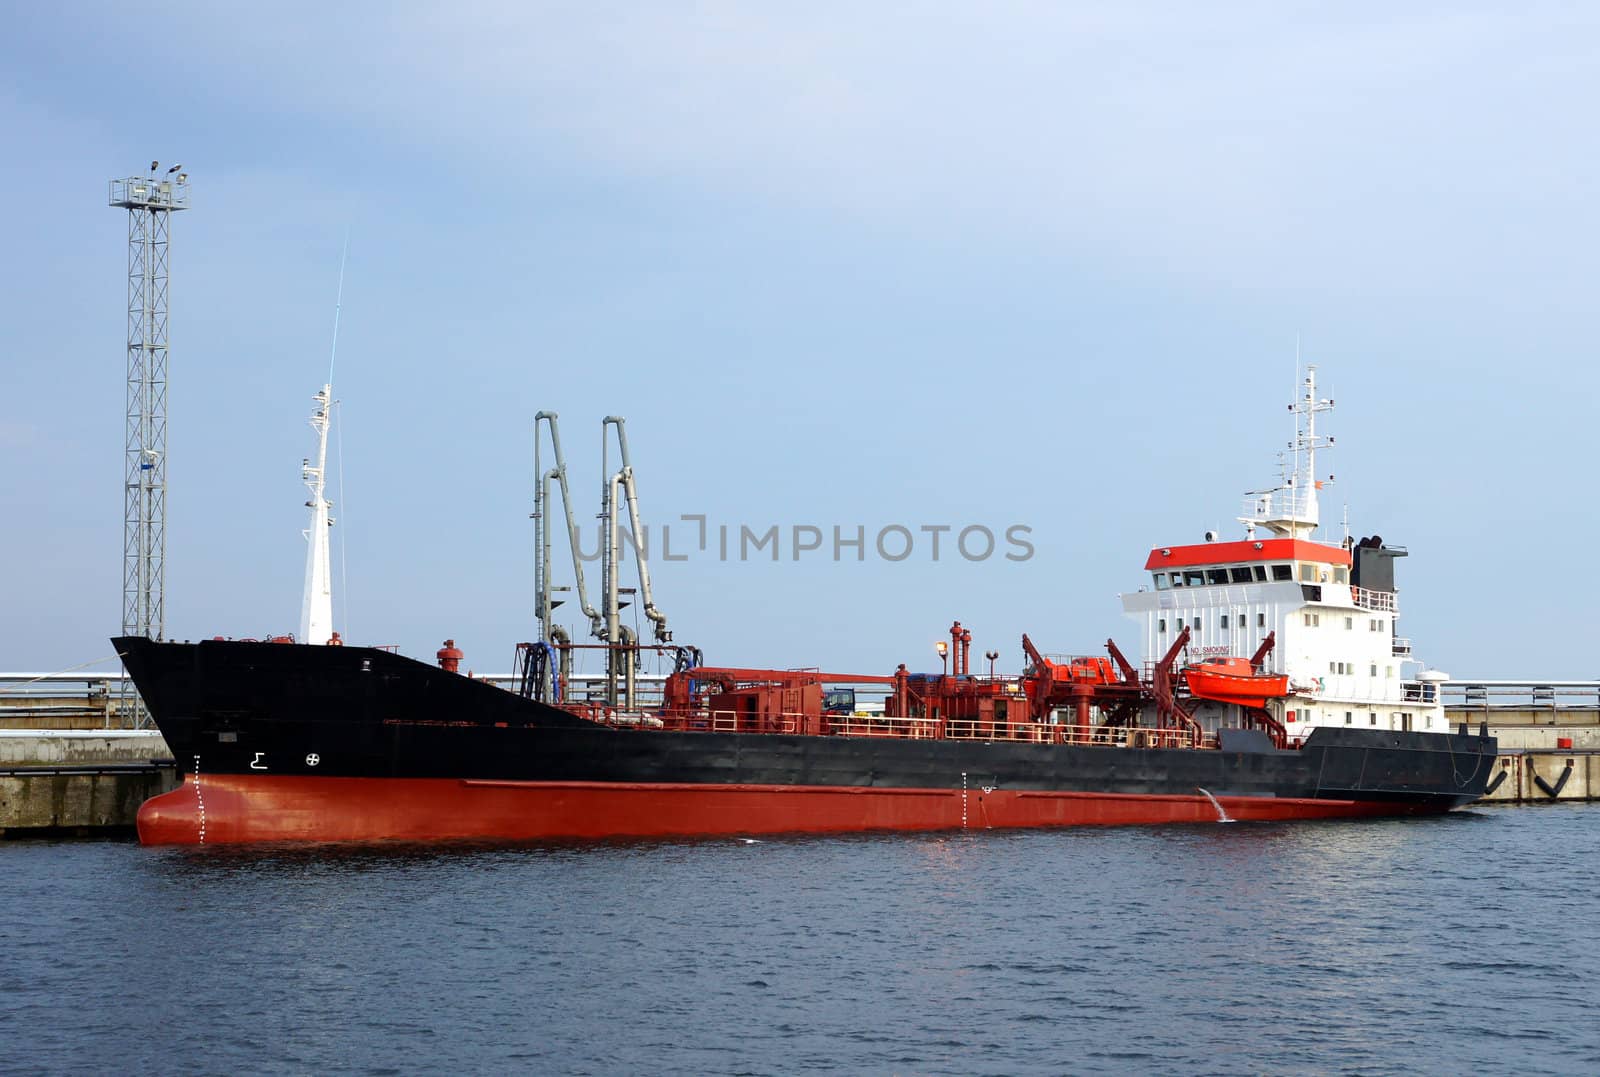 The tanker is moored in the port 